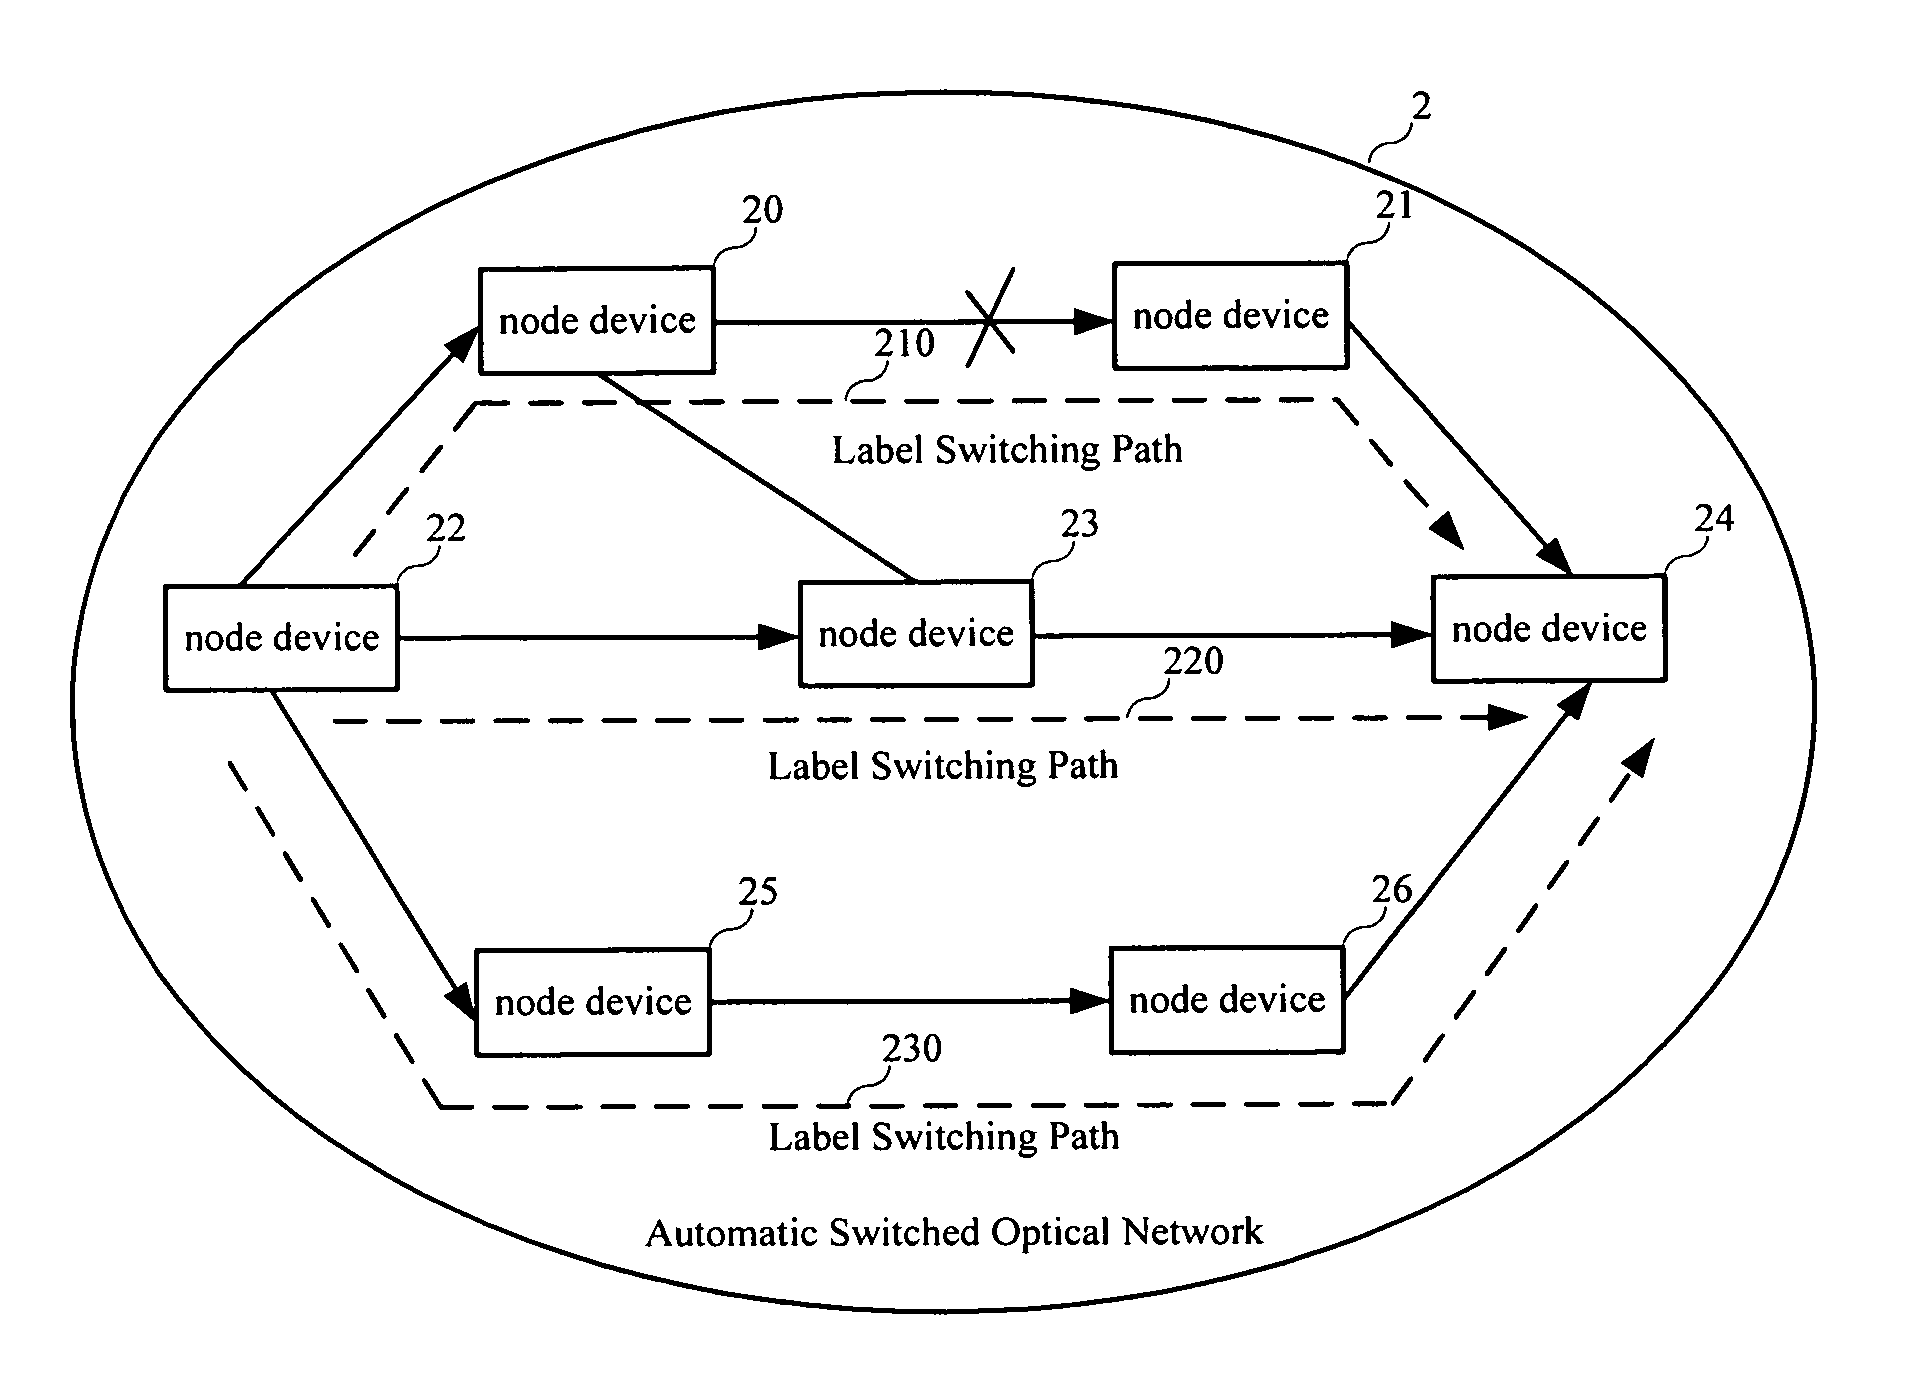 Method of implementing association in Automatic Switched Optical Network (ASON)